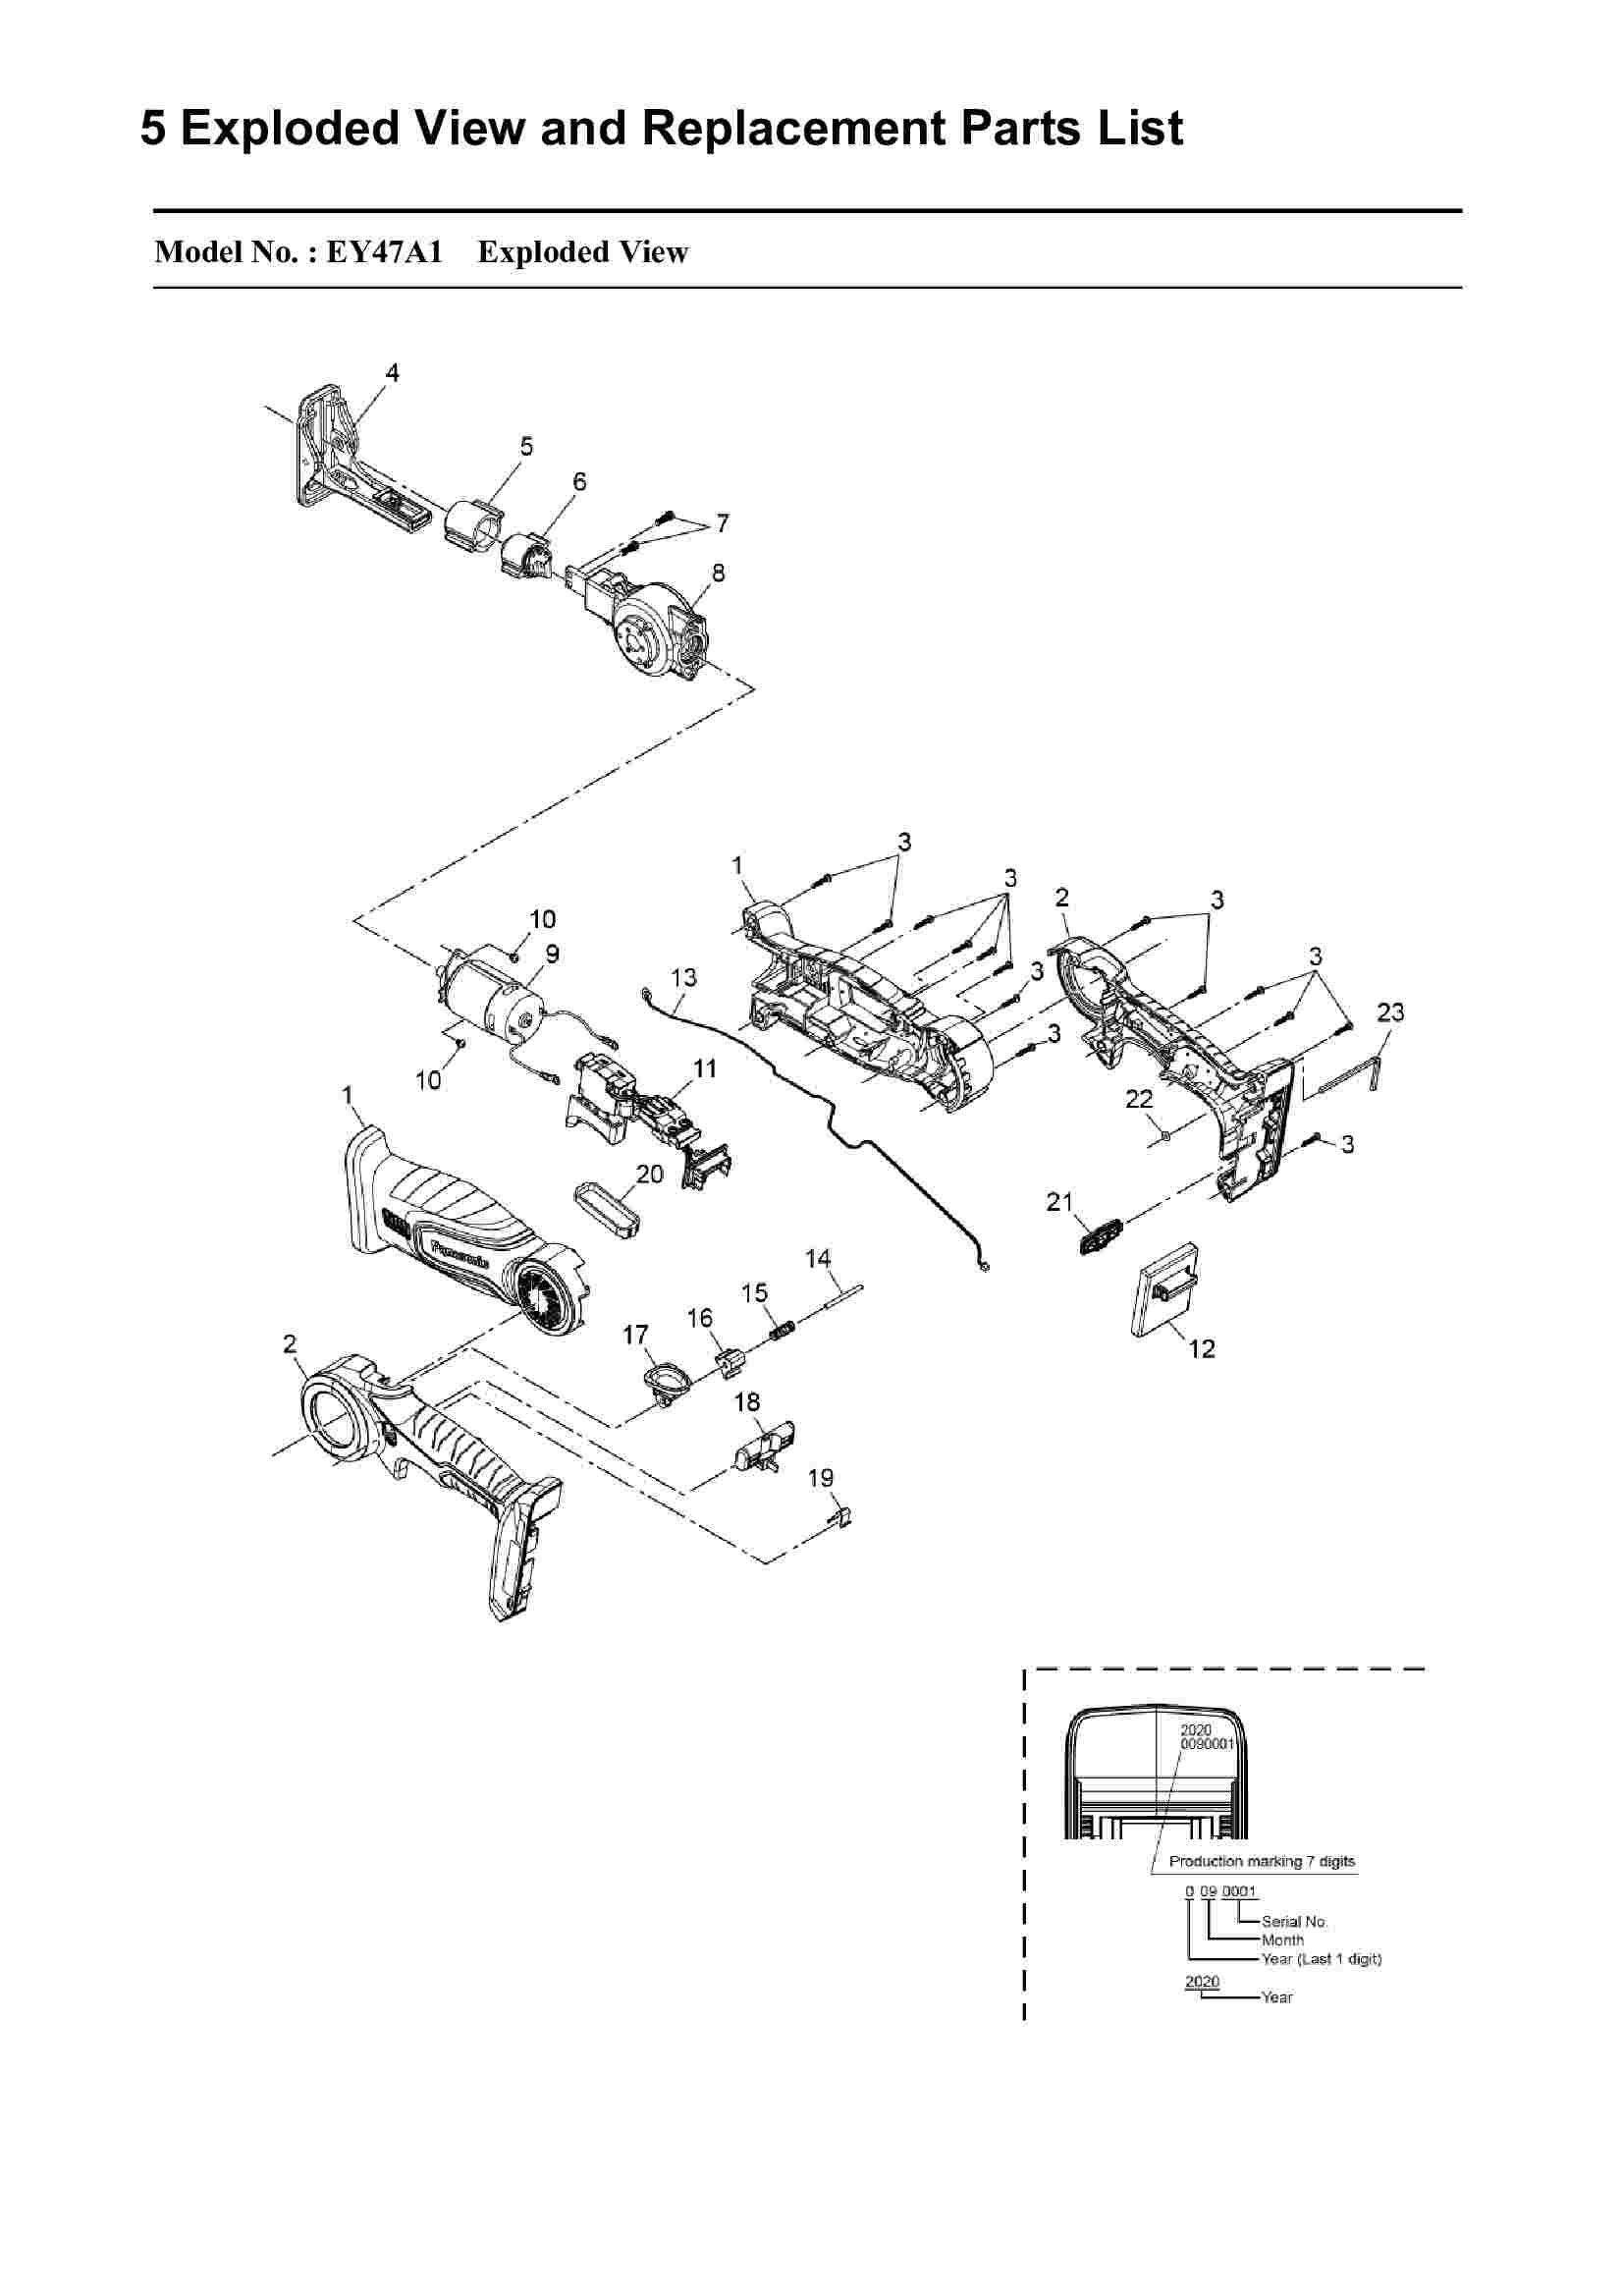 EY47A1: Exploded View